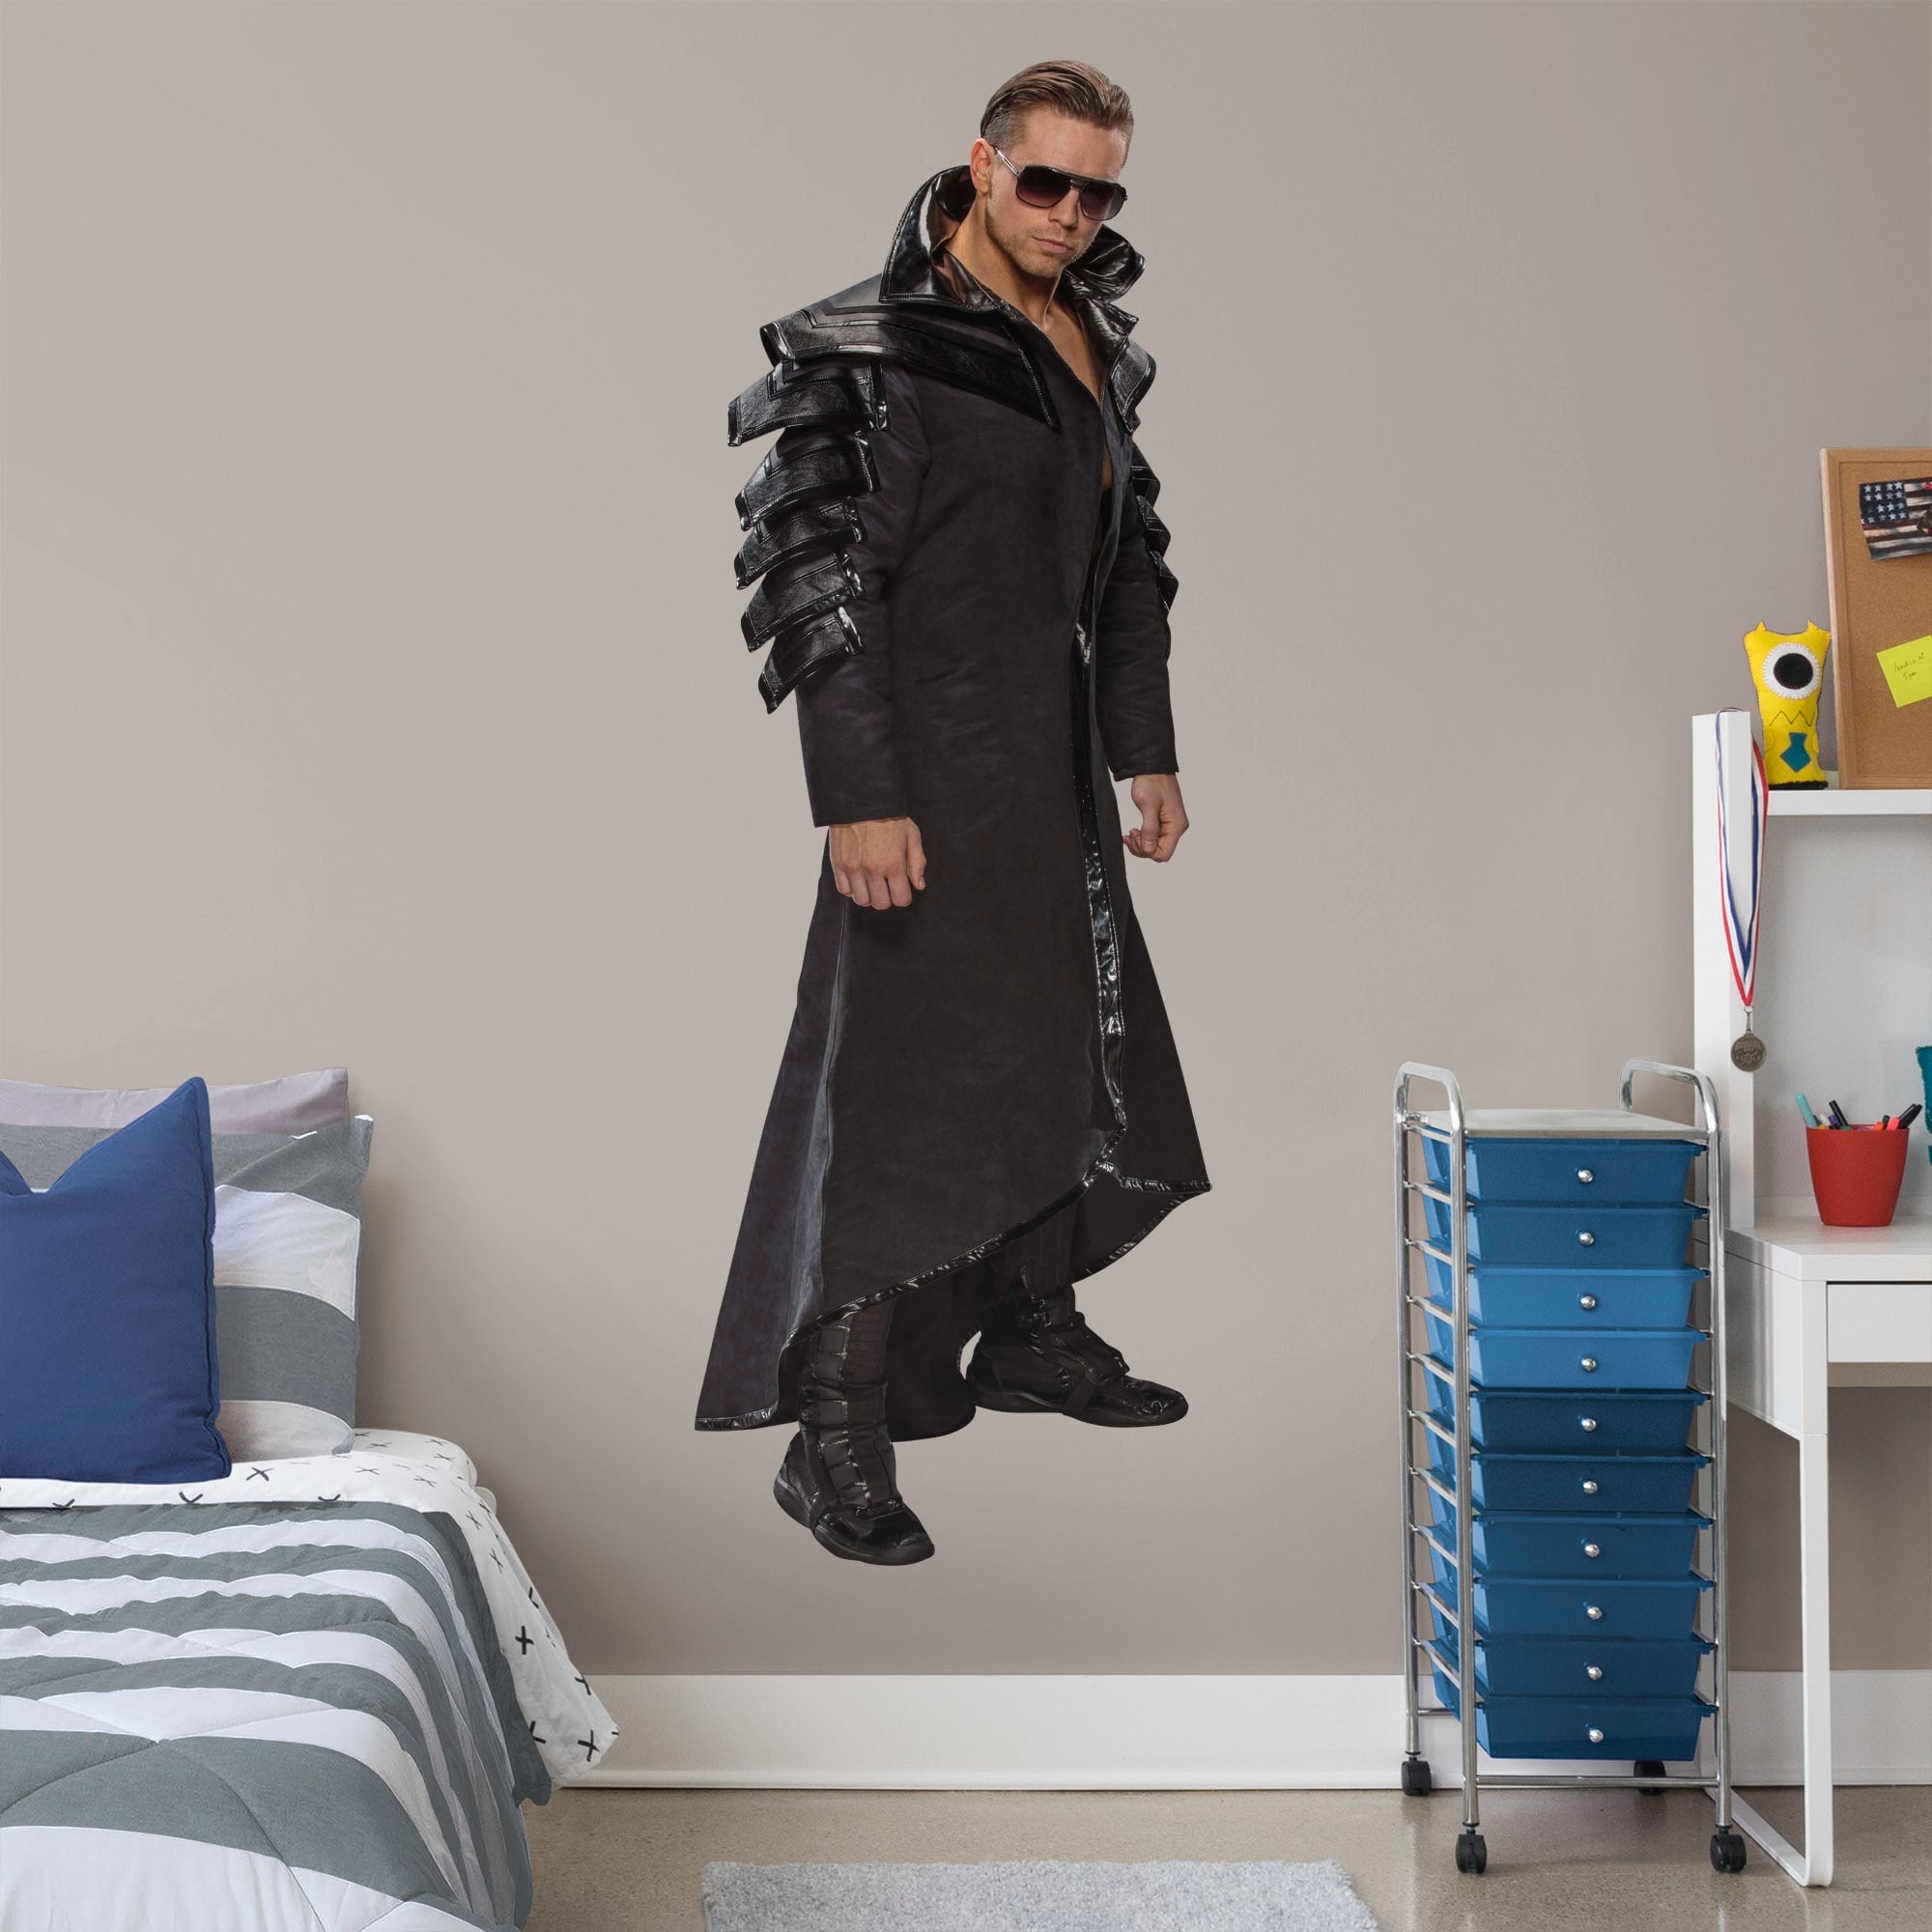 The Miz for WWE - Officially Licensed Removable Wall Decal Life-Size Superstar + 2 Decals (26"W x 77"H) by Fathead | Vinyl